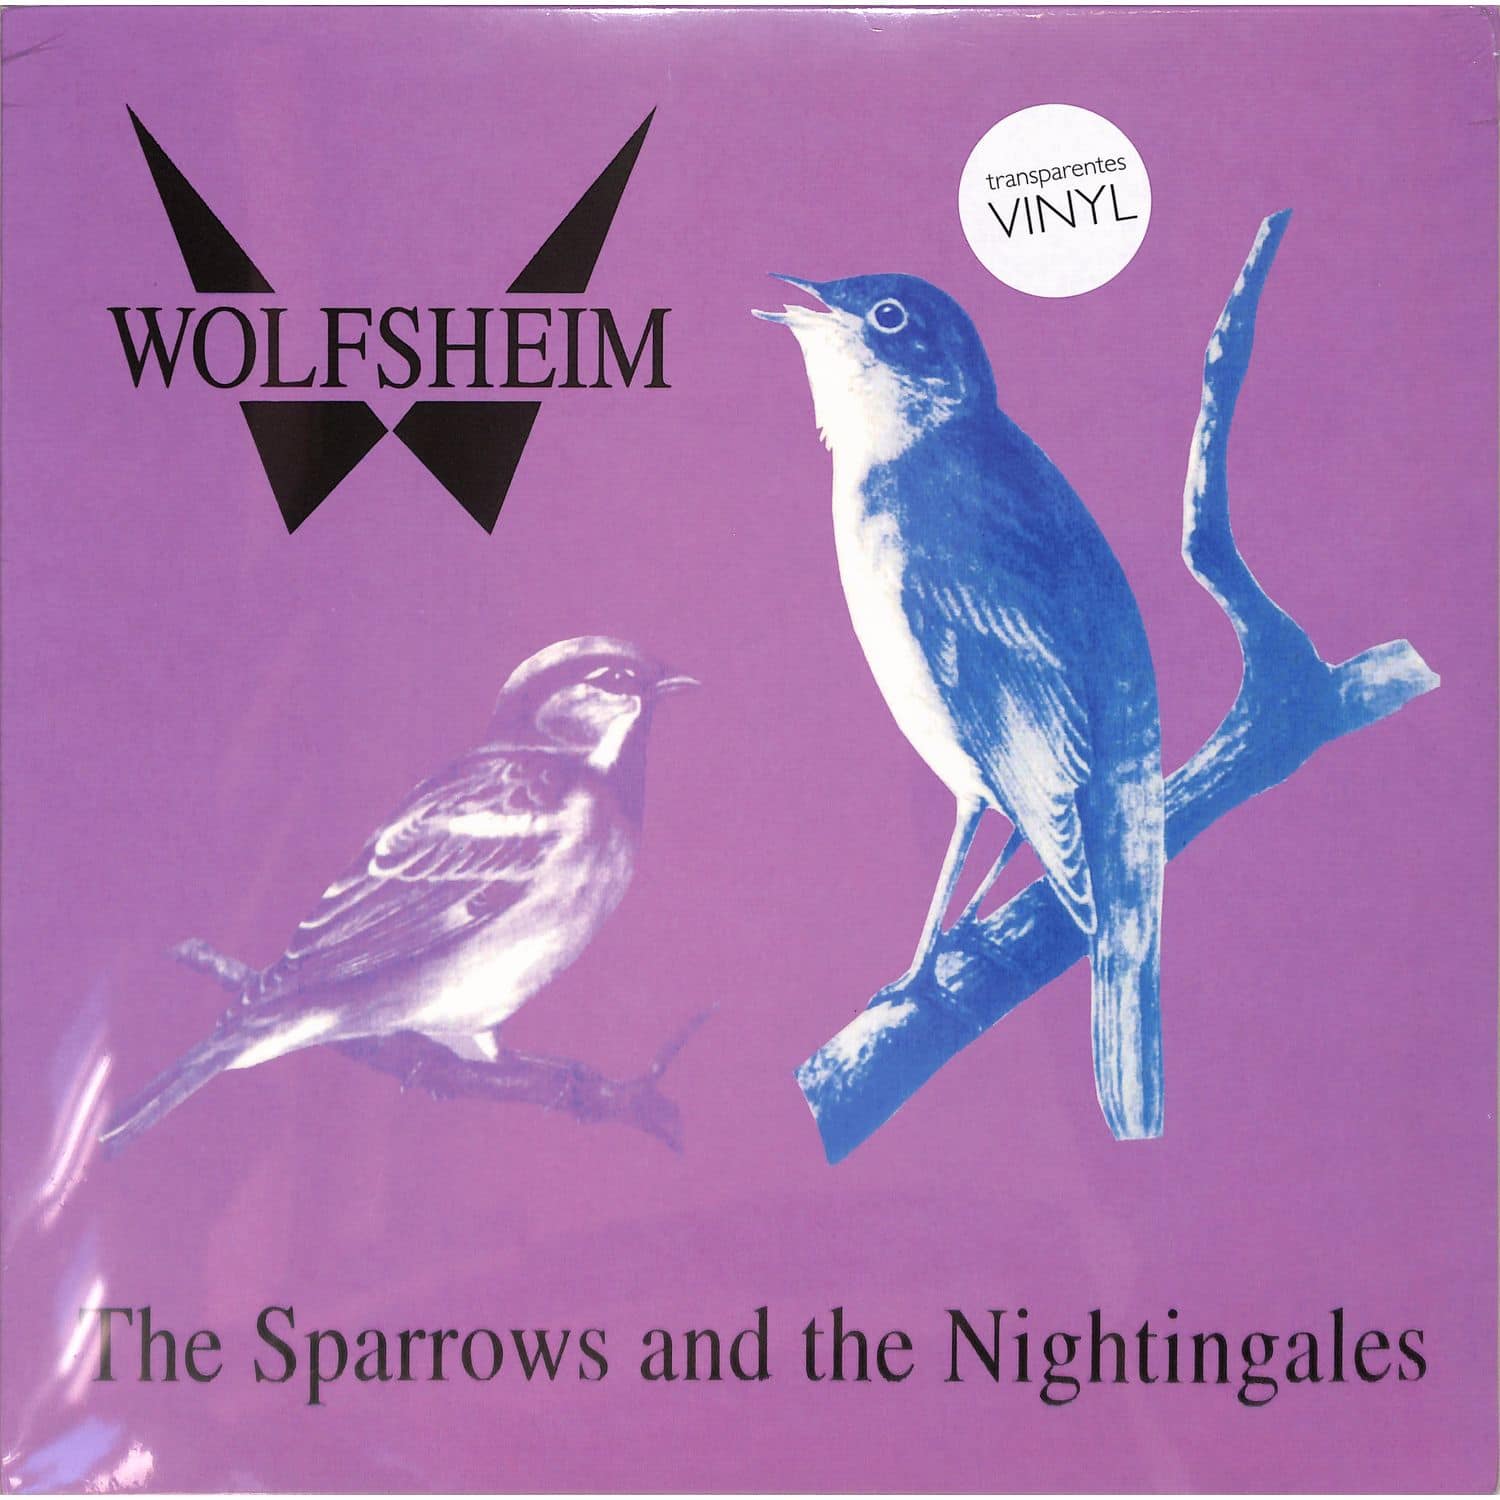 Wolfsheim - THE SPARROWS AND THE NIGHTINGALES 